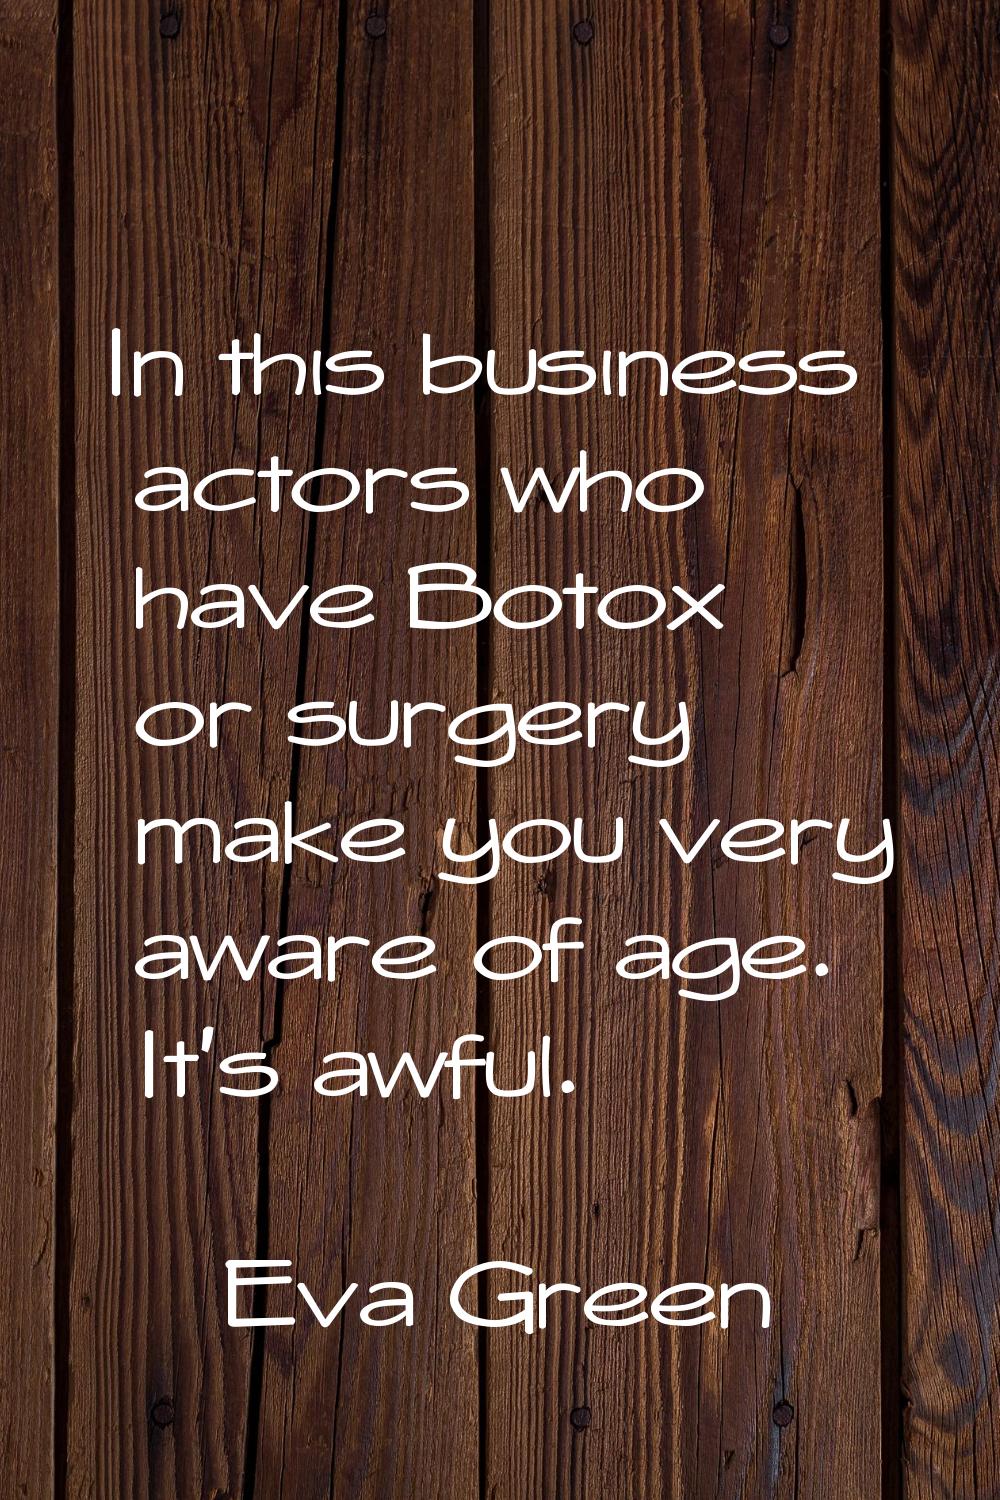 In this business actors who have Botox or surgery make you very aware of age. It's awful.